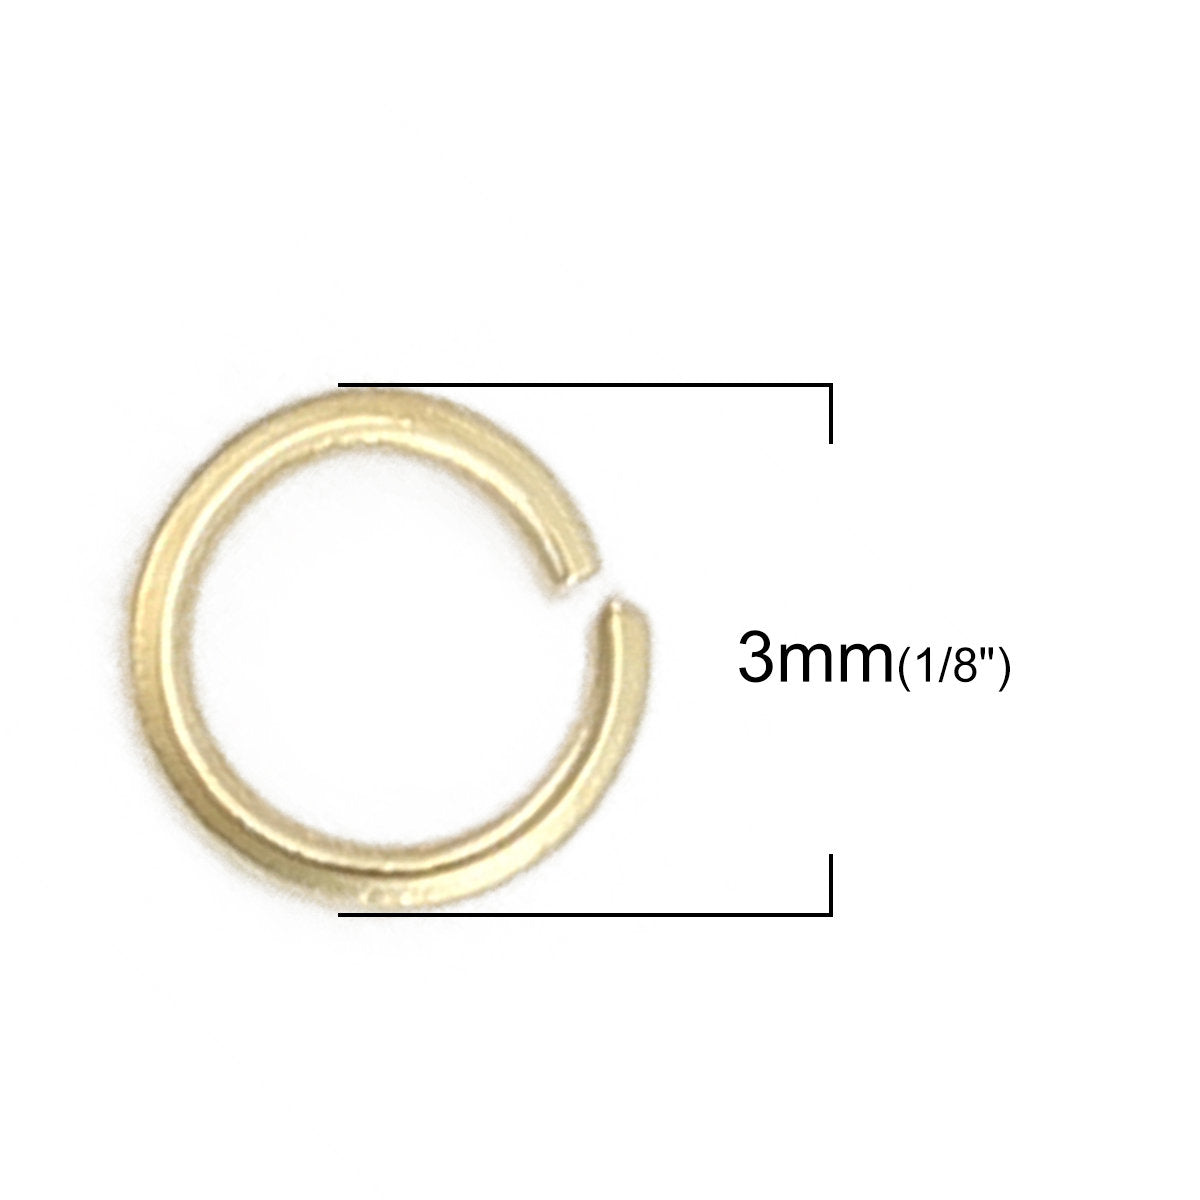 6mm x 4mm 10pcs Gold Plated 304 Stainless Steel Earring Backs